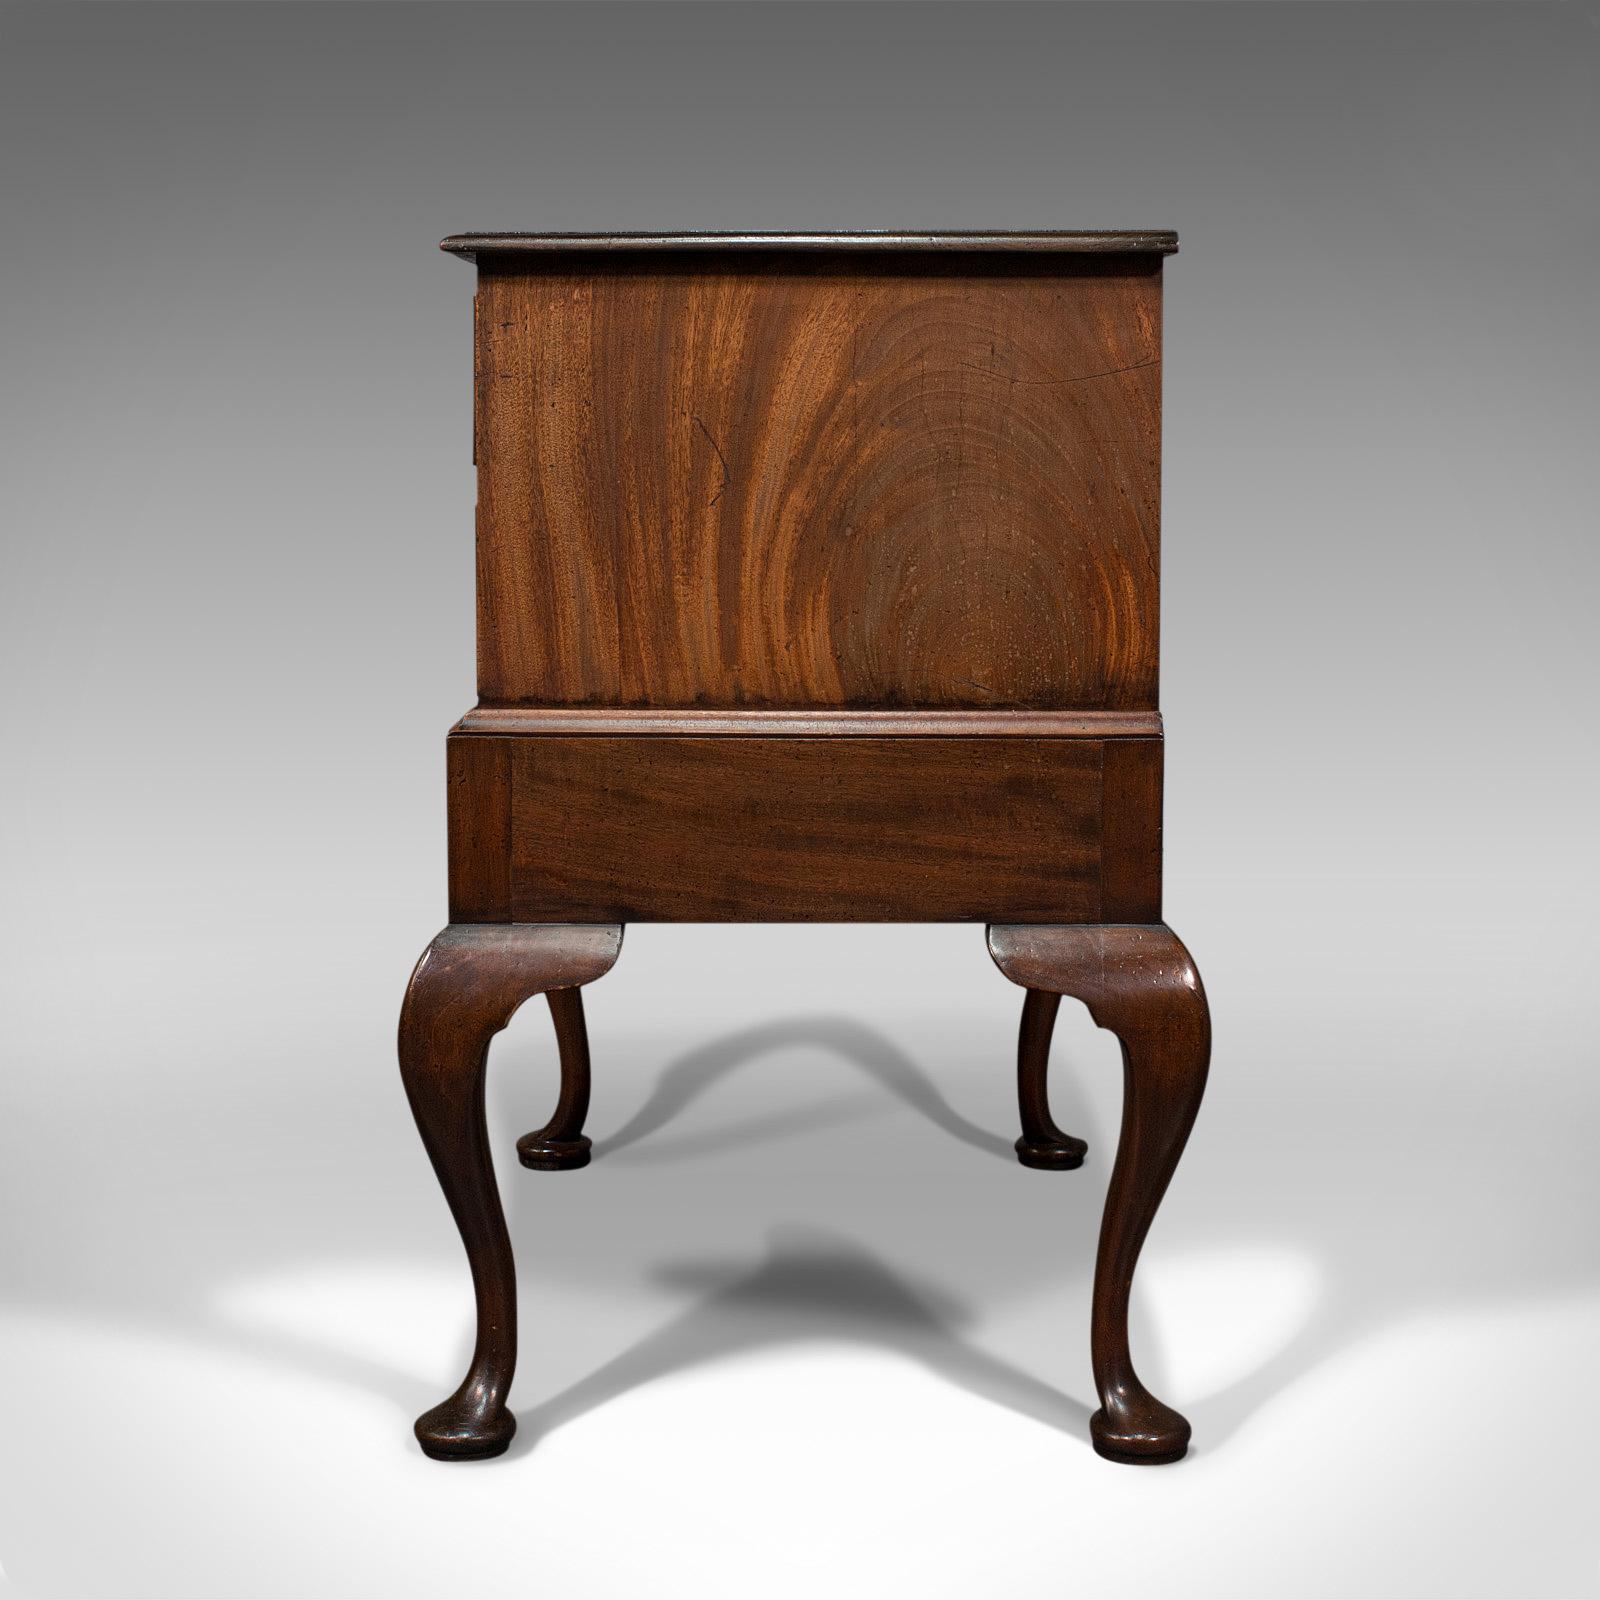 19th Century Antique Dwarf Chest on Stand, English, Flame Mahogany, Victorian, Circa 1900